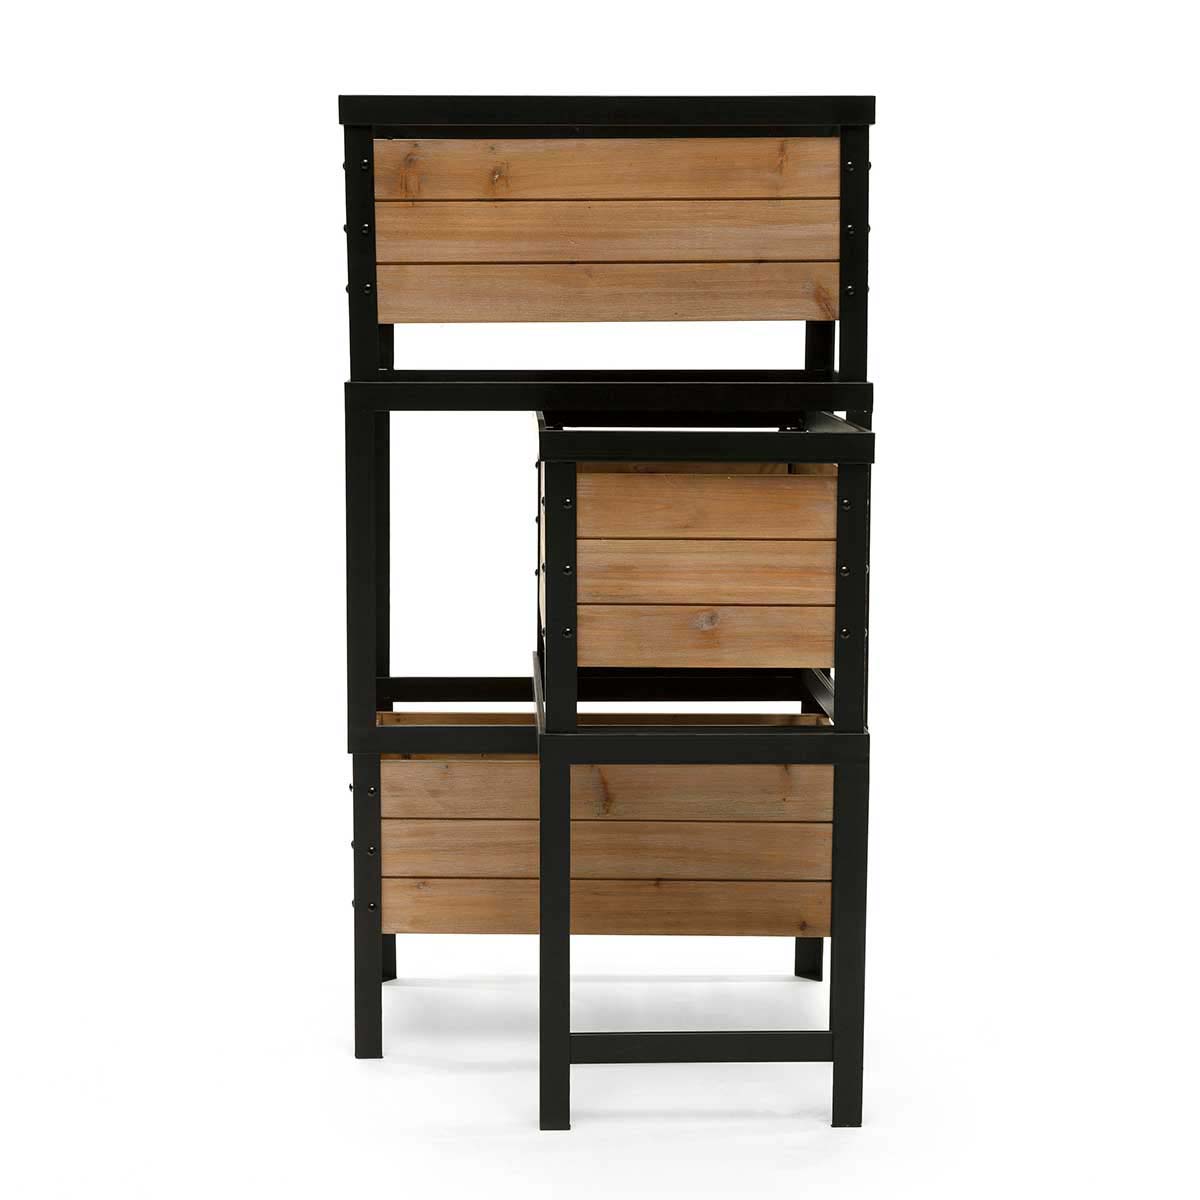 DISPLAY 3 BOX WITH STAND 39IN X 12IN X 36.5IN BROWN/BLACK